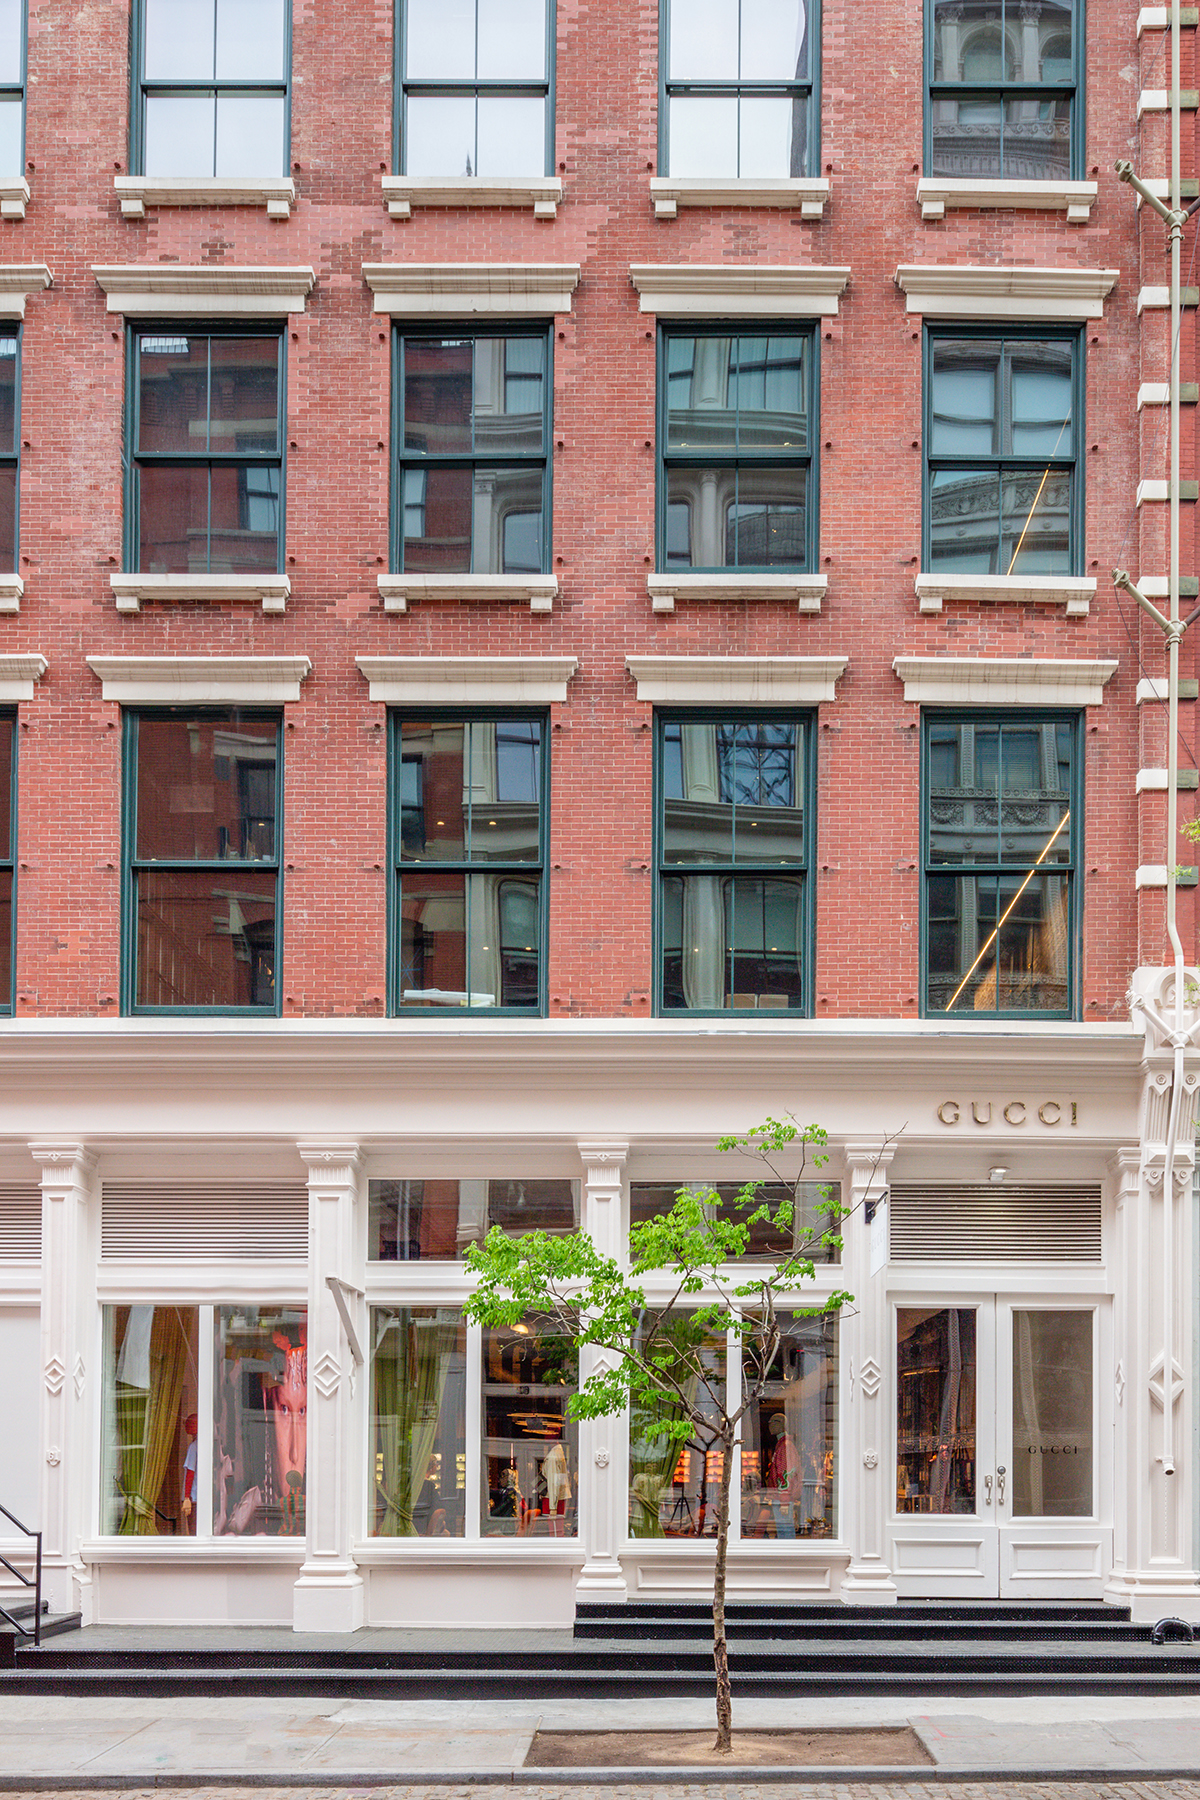 Gucci's SoHo, New York Store on Wooster Street